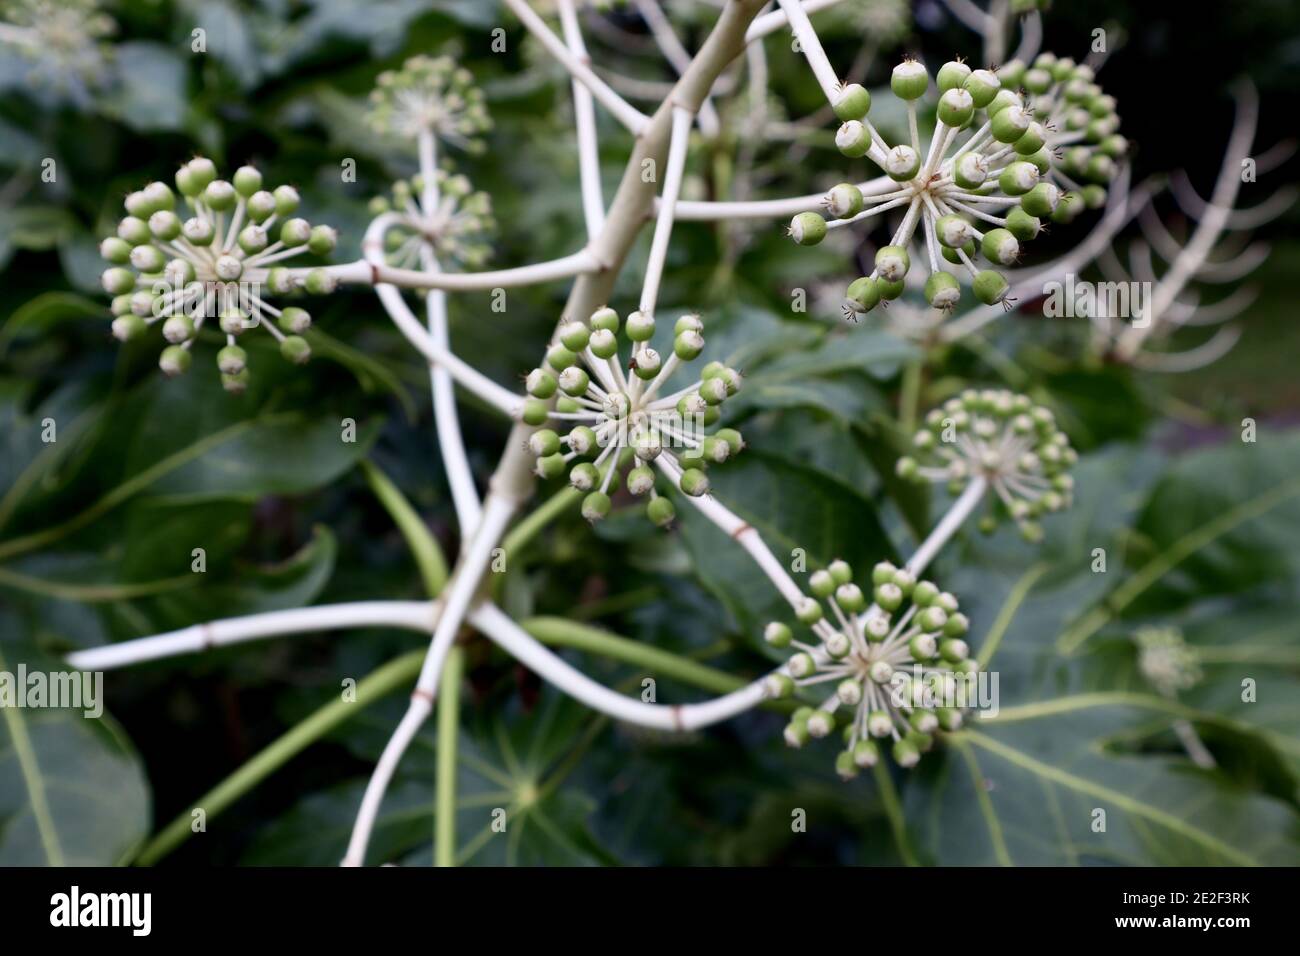 Fatsia japonica Caster oil plant or Paper plant - satellites of spherical flowerbuds,  January, England, UK Stock Photo